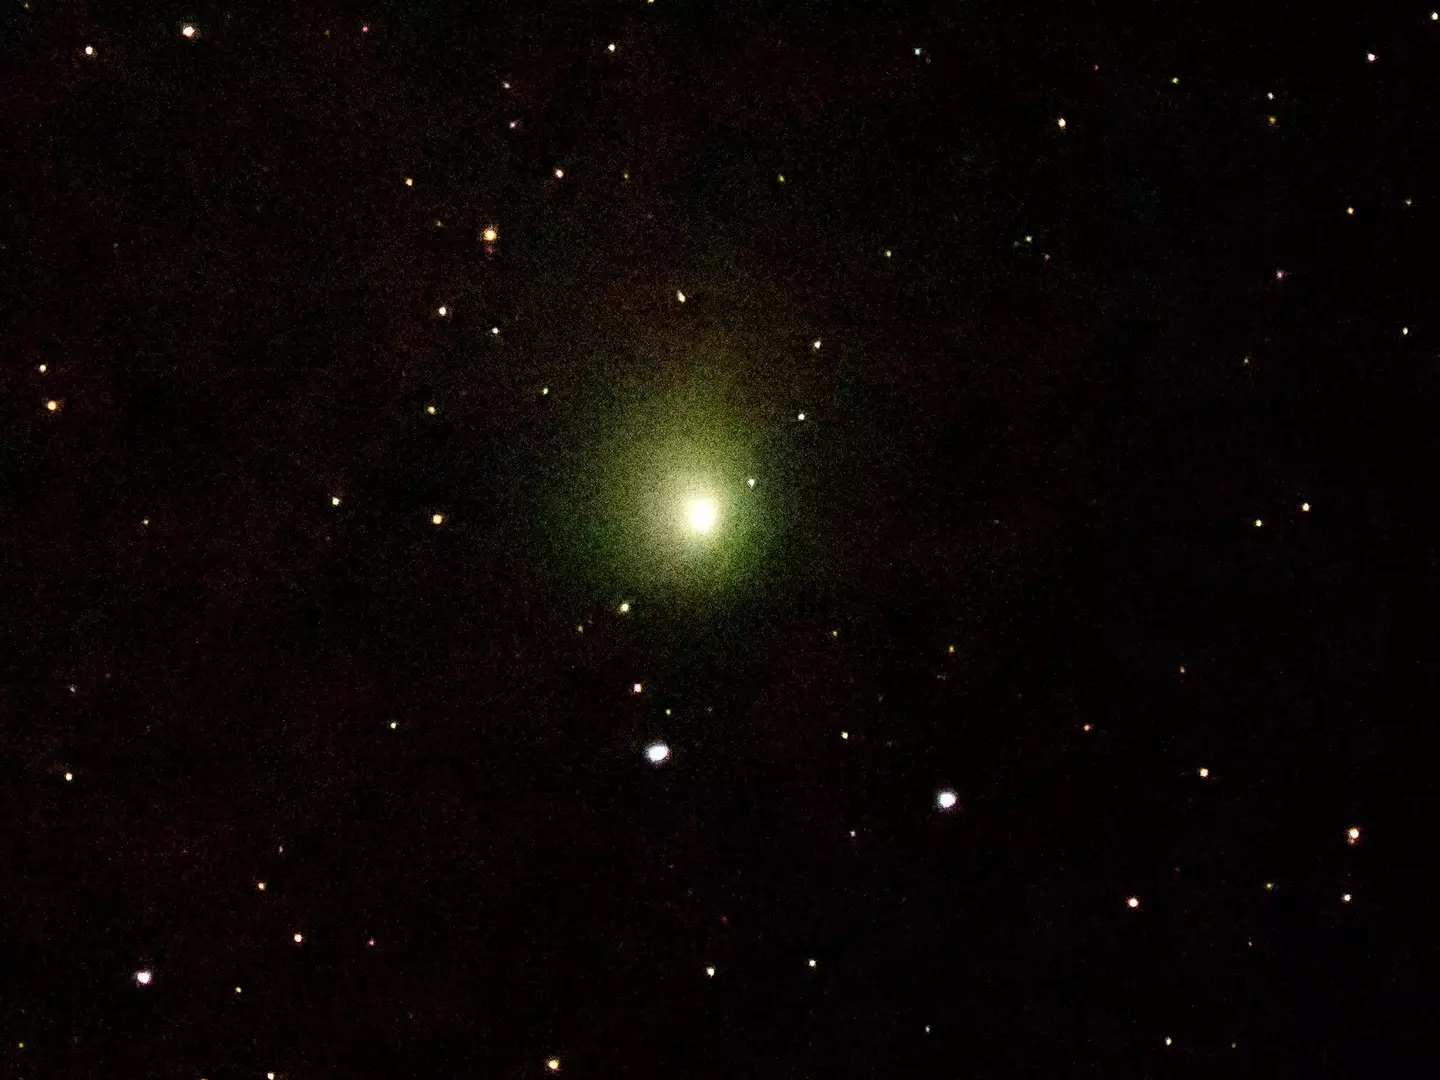 The comet photographed from Kent during the early hours.